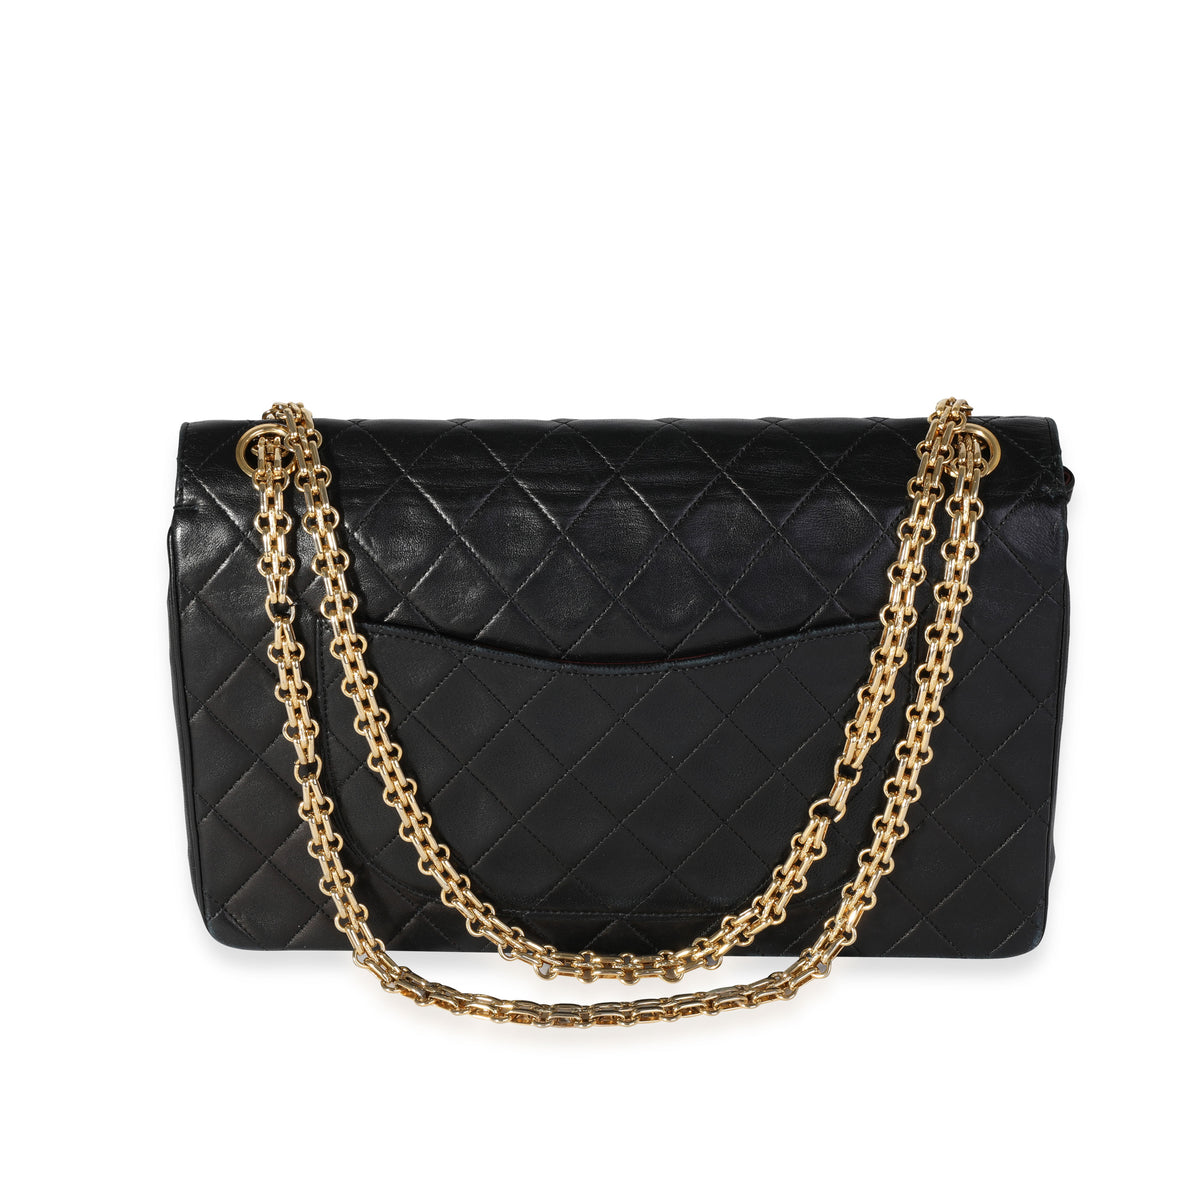 Chanel Vintage Black Quilted Lambskin Medium Double Flap